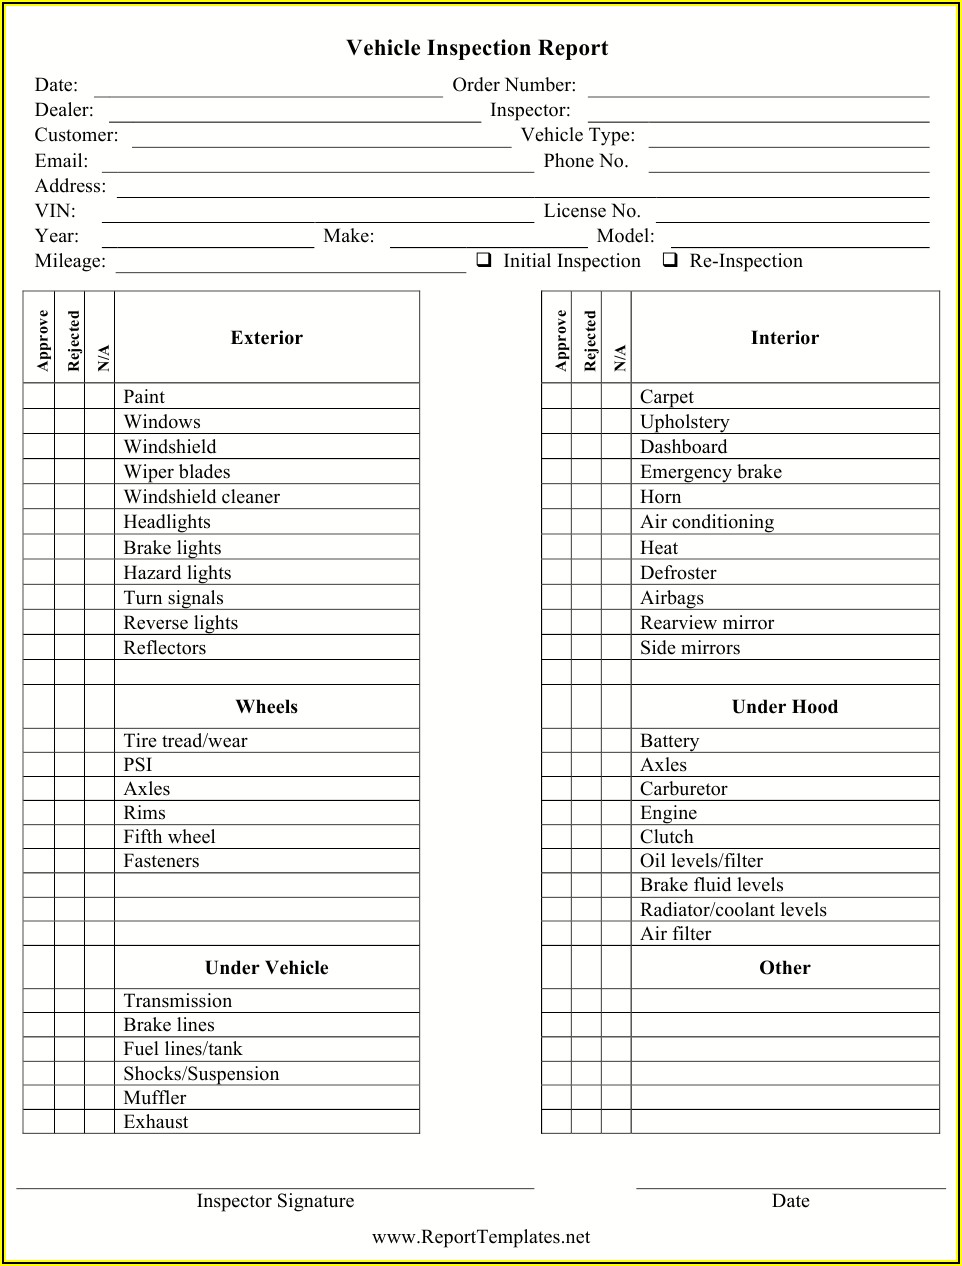 Vehicle Inspection Report Form